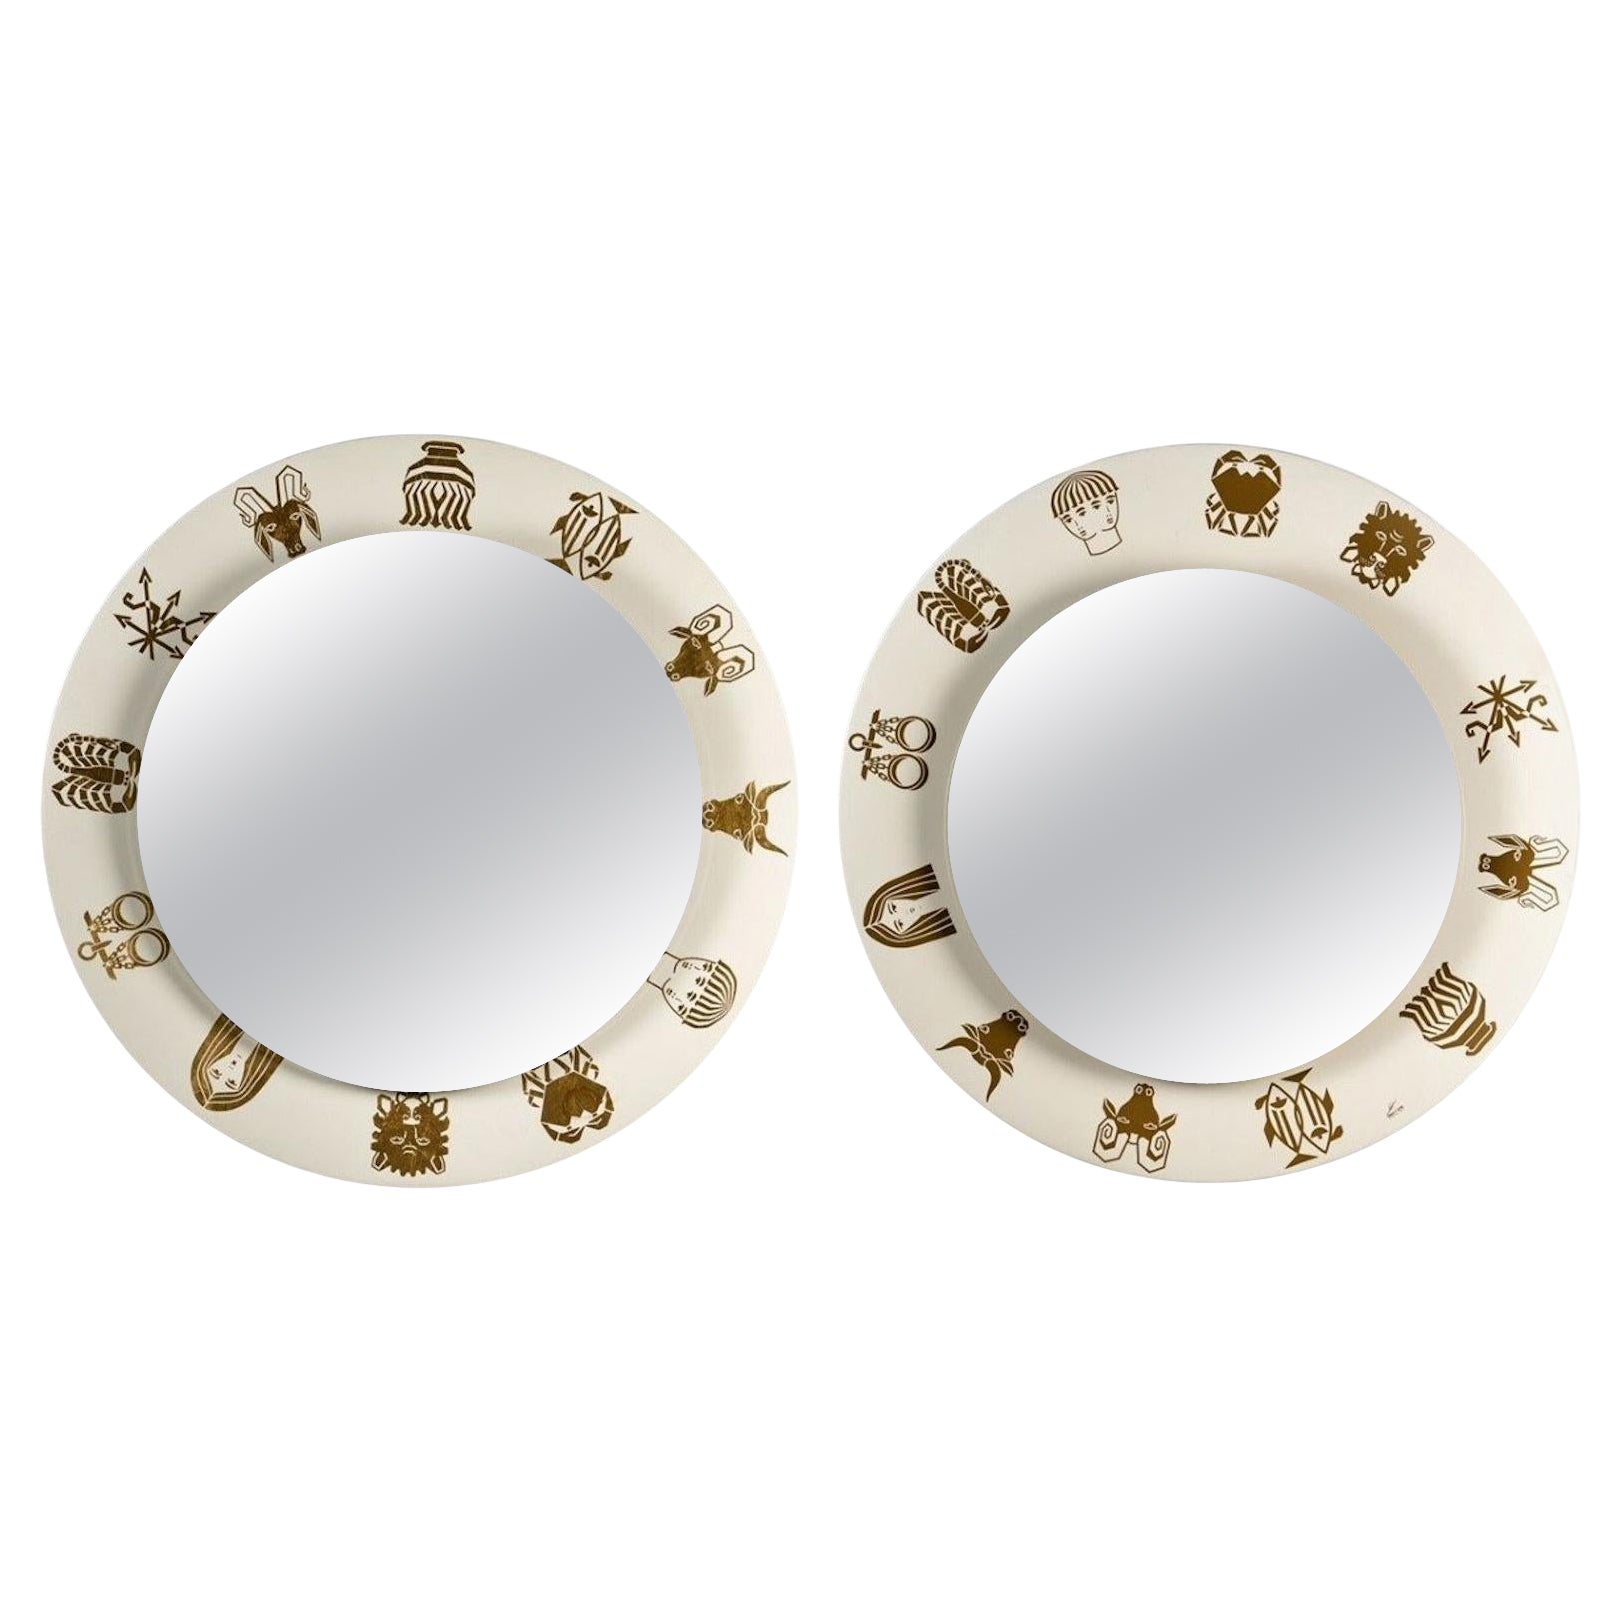 Pair of Illuminated Mirrors by Benedetto Fornasetti, Circa 1970. For Sale